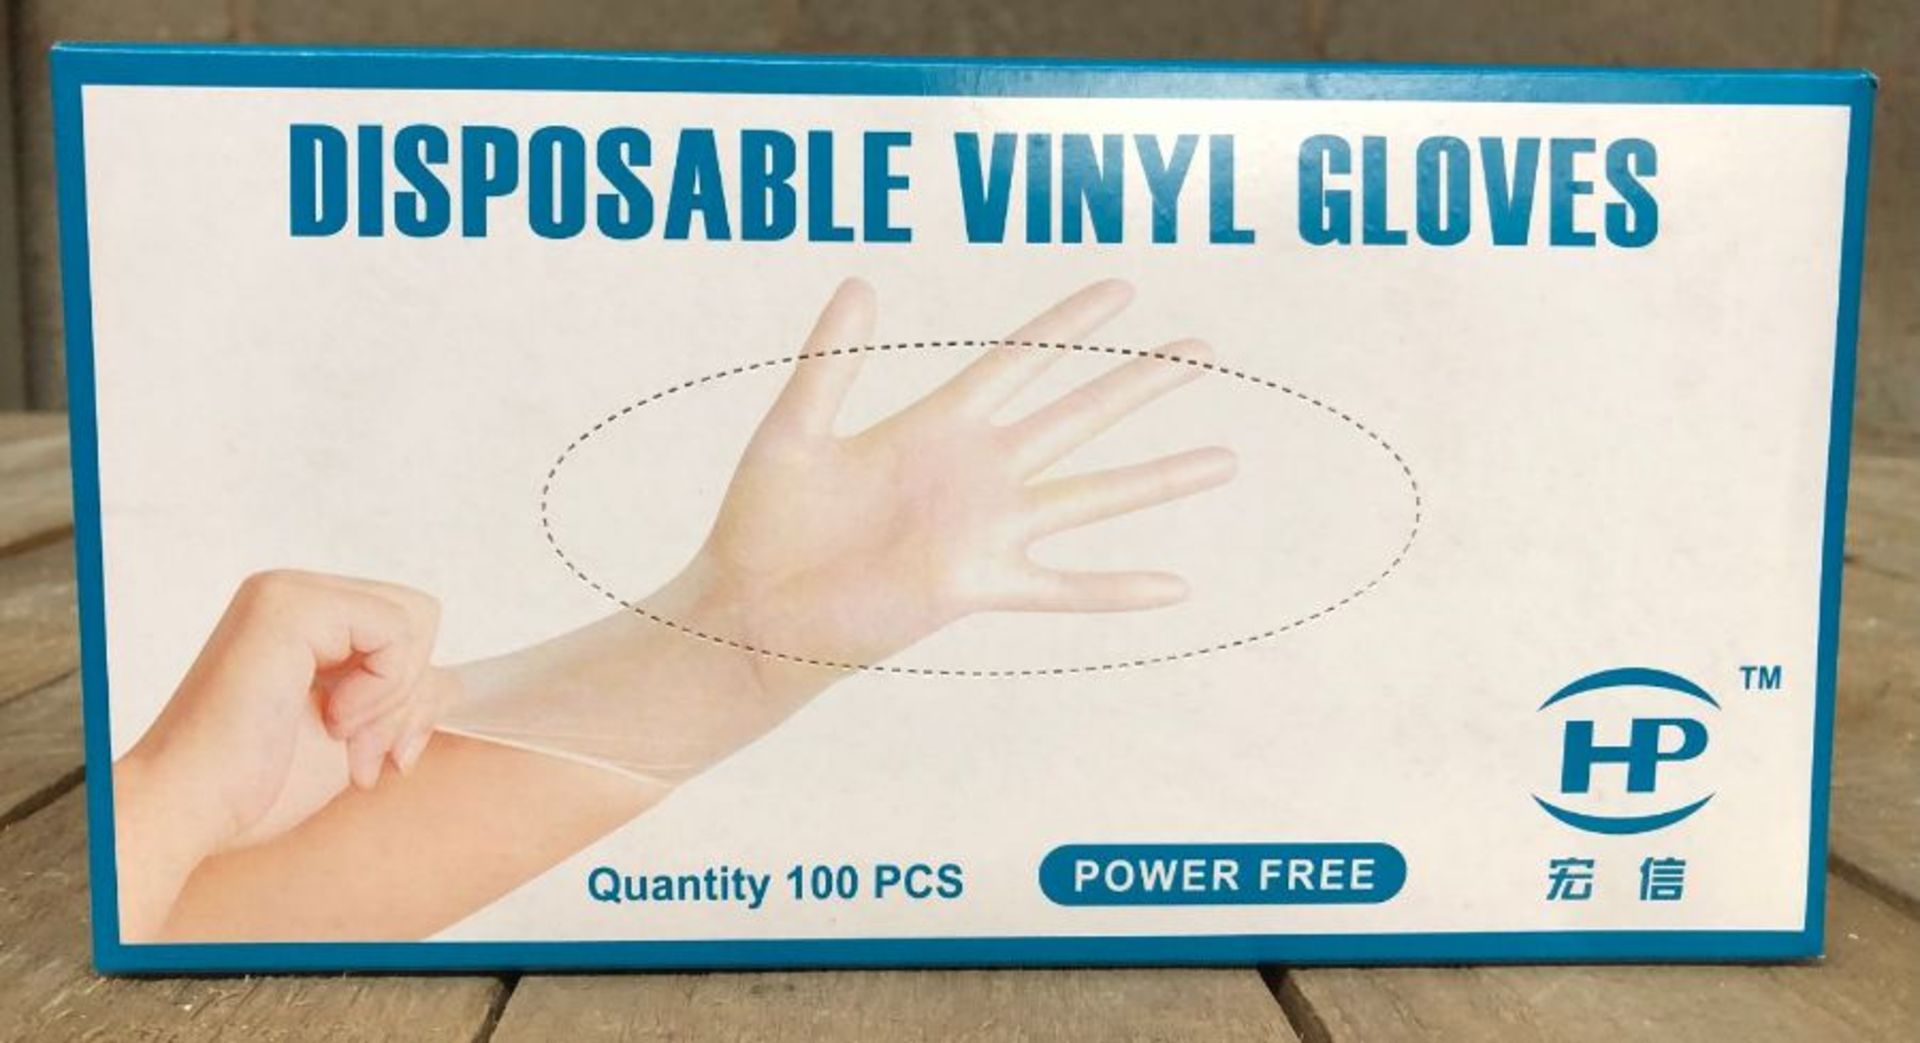 6 X BOXES OF HP DISPOSABLE VINYL GLOVES, POWDER FREE - 10 PACKS PER BOX, 100 GLOVES PER PACK / AS